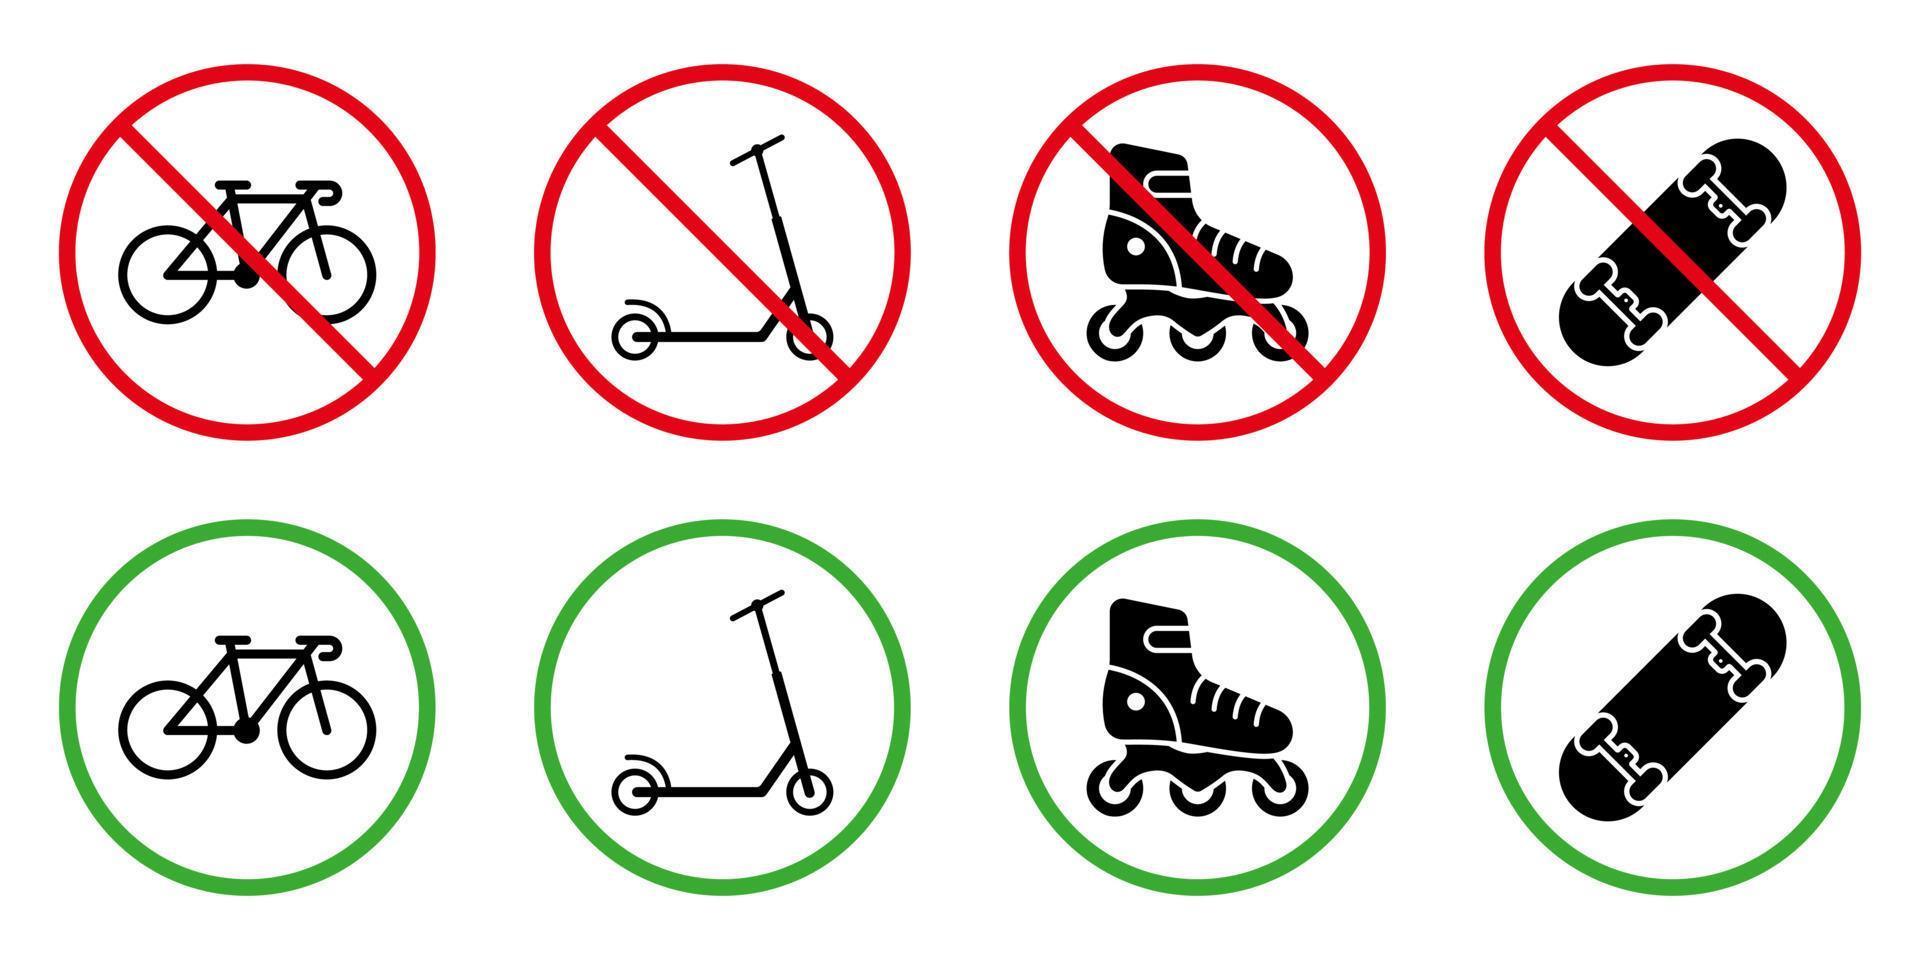 Allowed Zone for Push Transport Sign Set. Forbid Roller Skate Board Kick Scooter Black Bicycle Silhouette Icon. Attention Prohibit Danger Area Wheel Transport Pictogram. Isolated Vector Illustration.